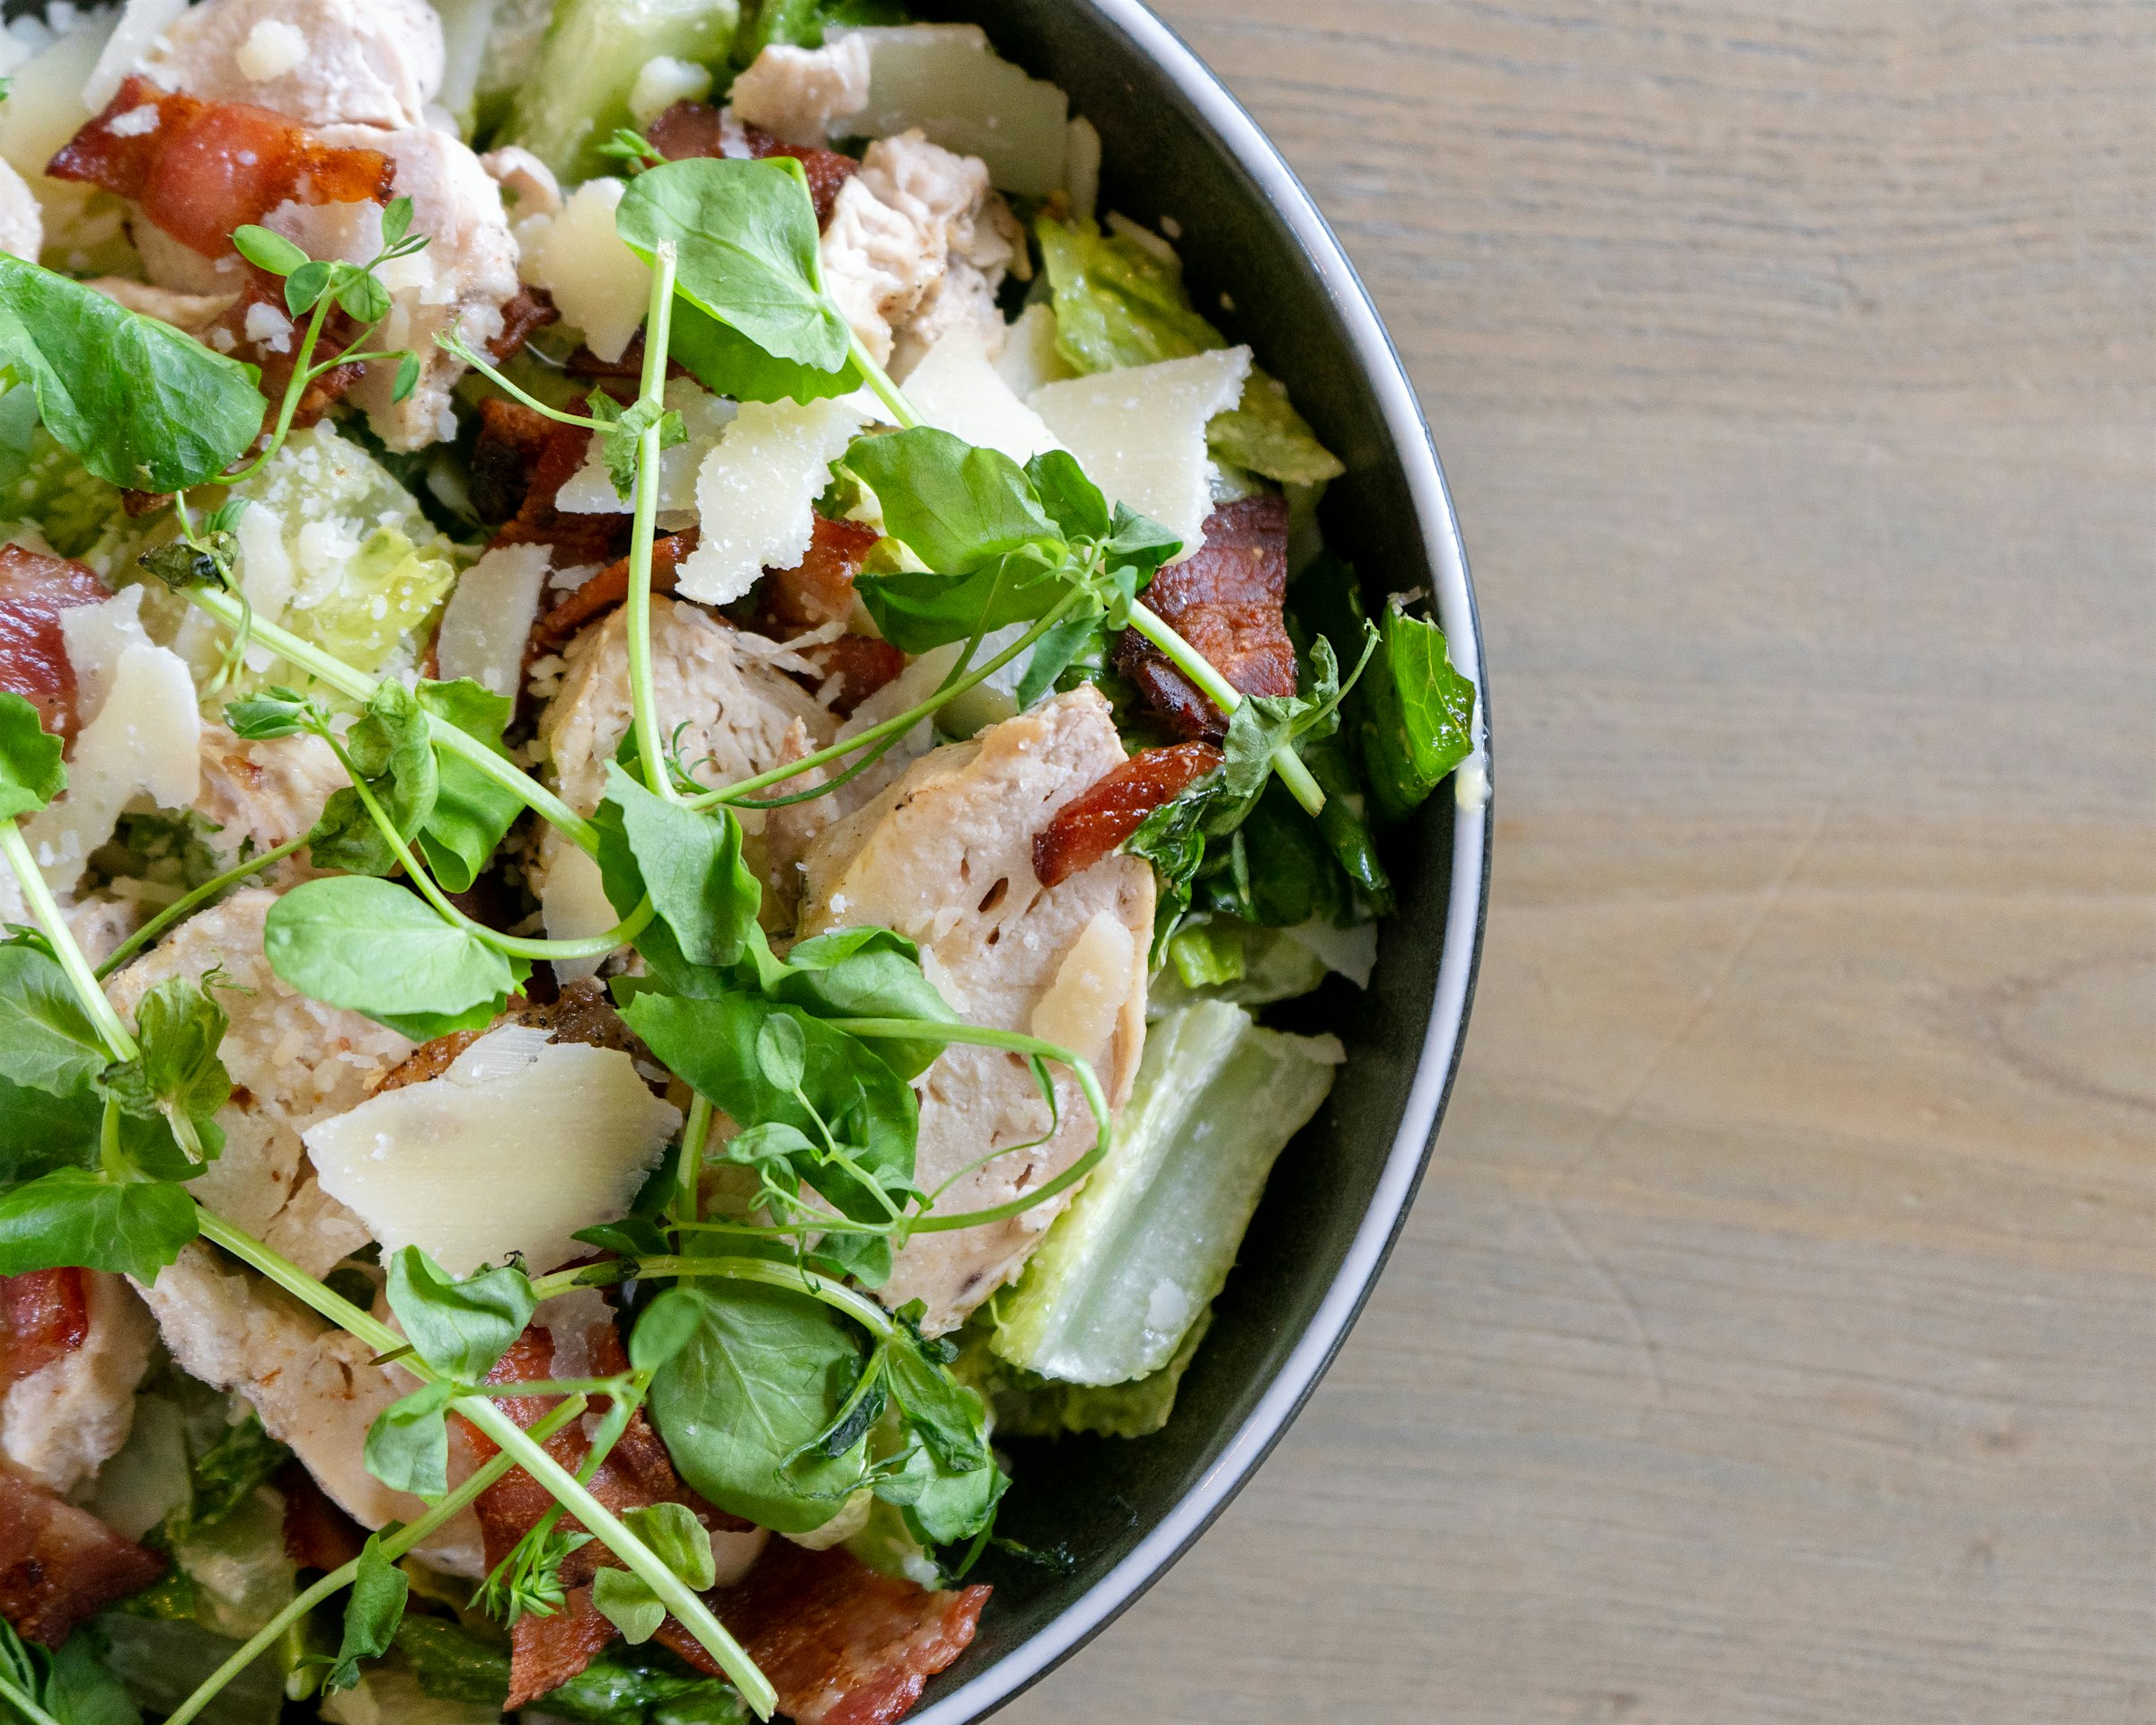 A plate of caesar salad, with chicken fillet, bacon, parmesan and lettuce. Photo